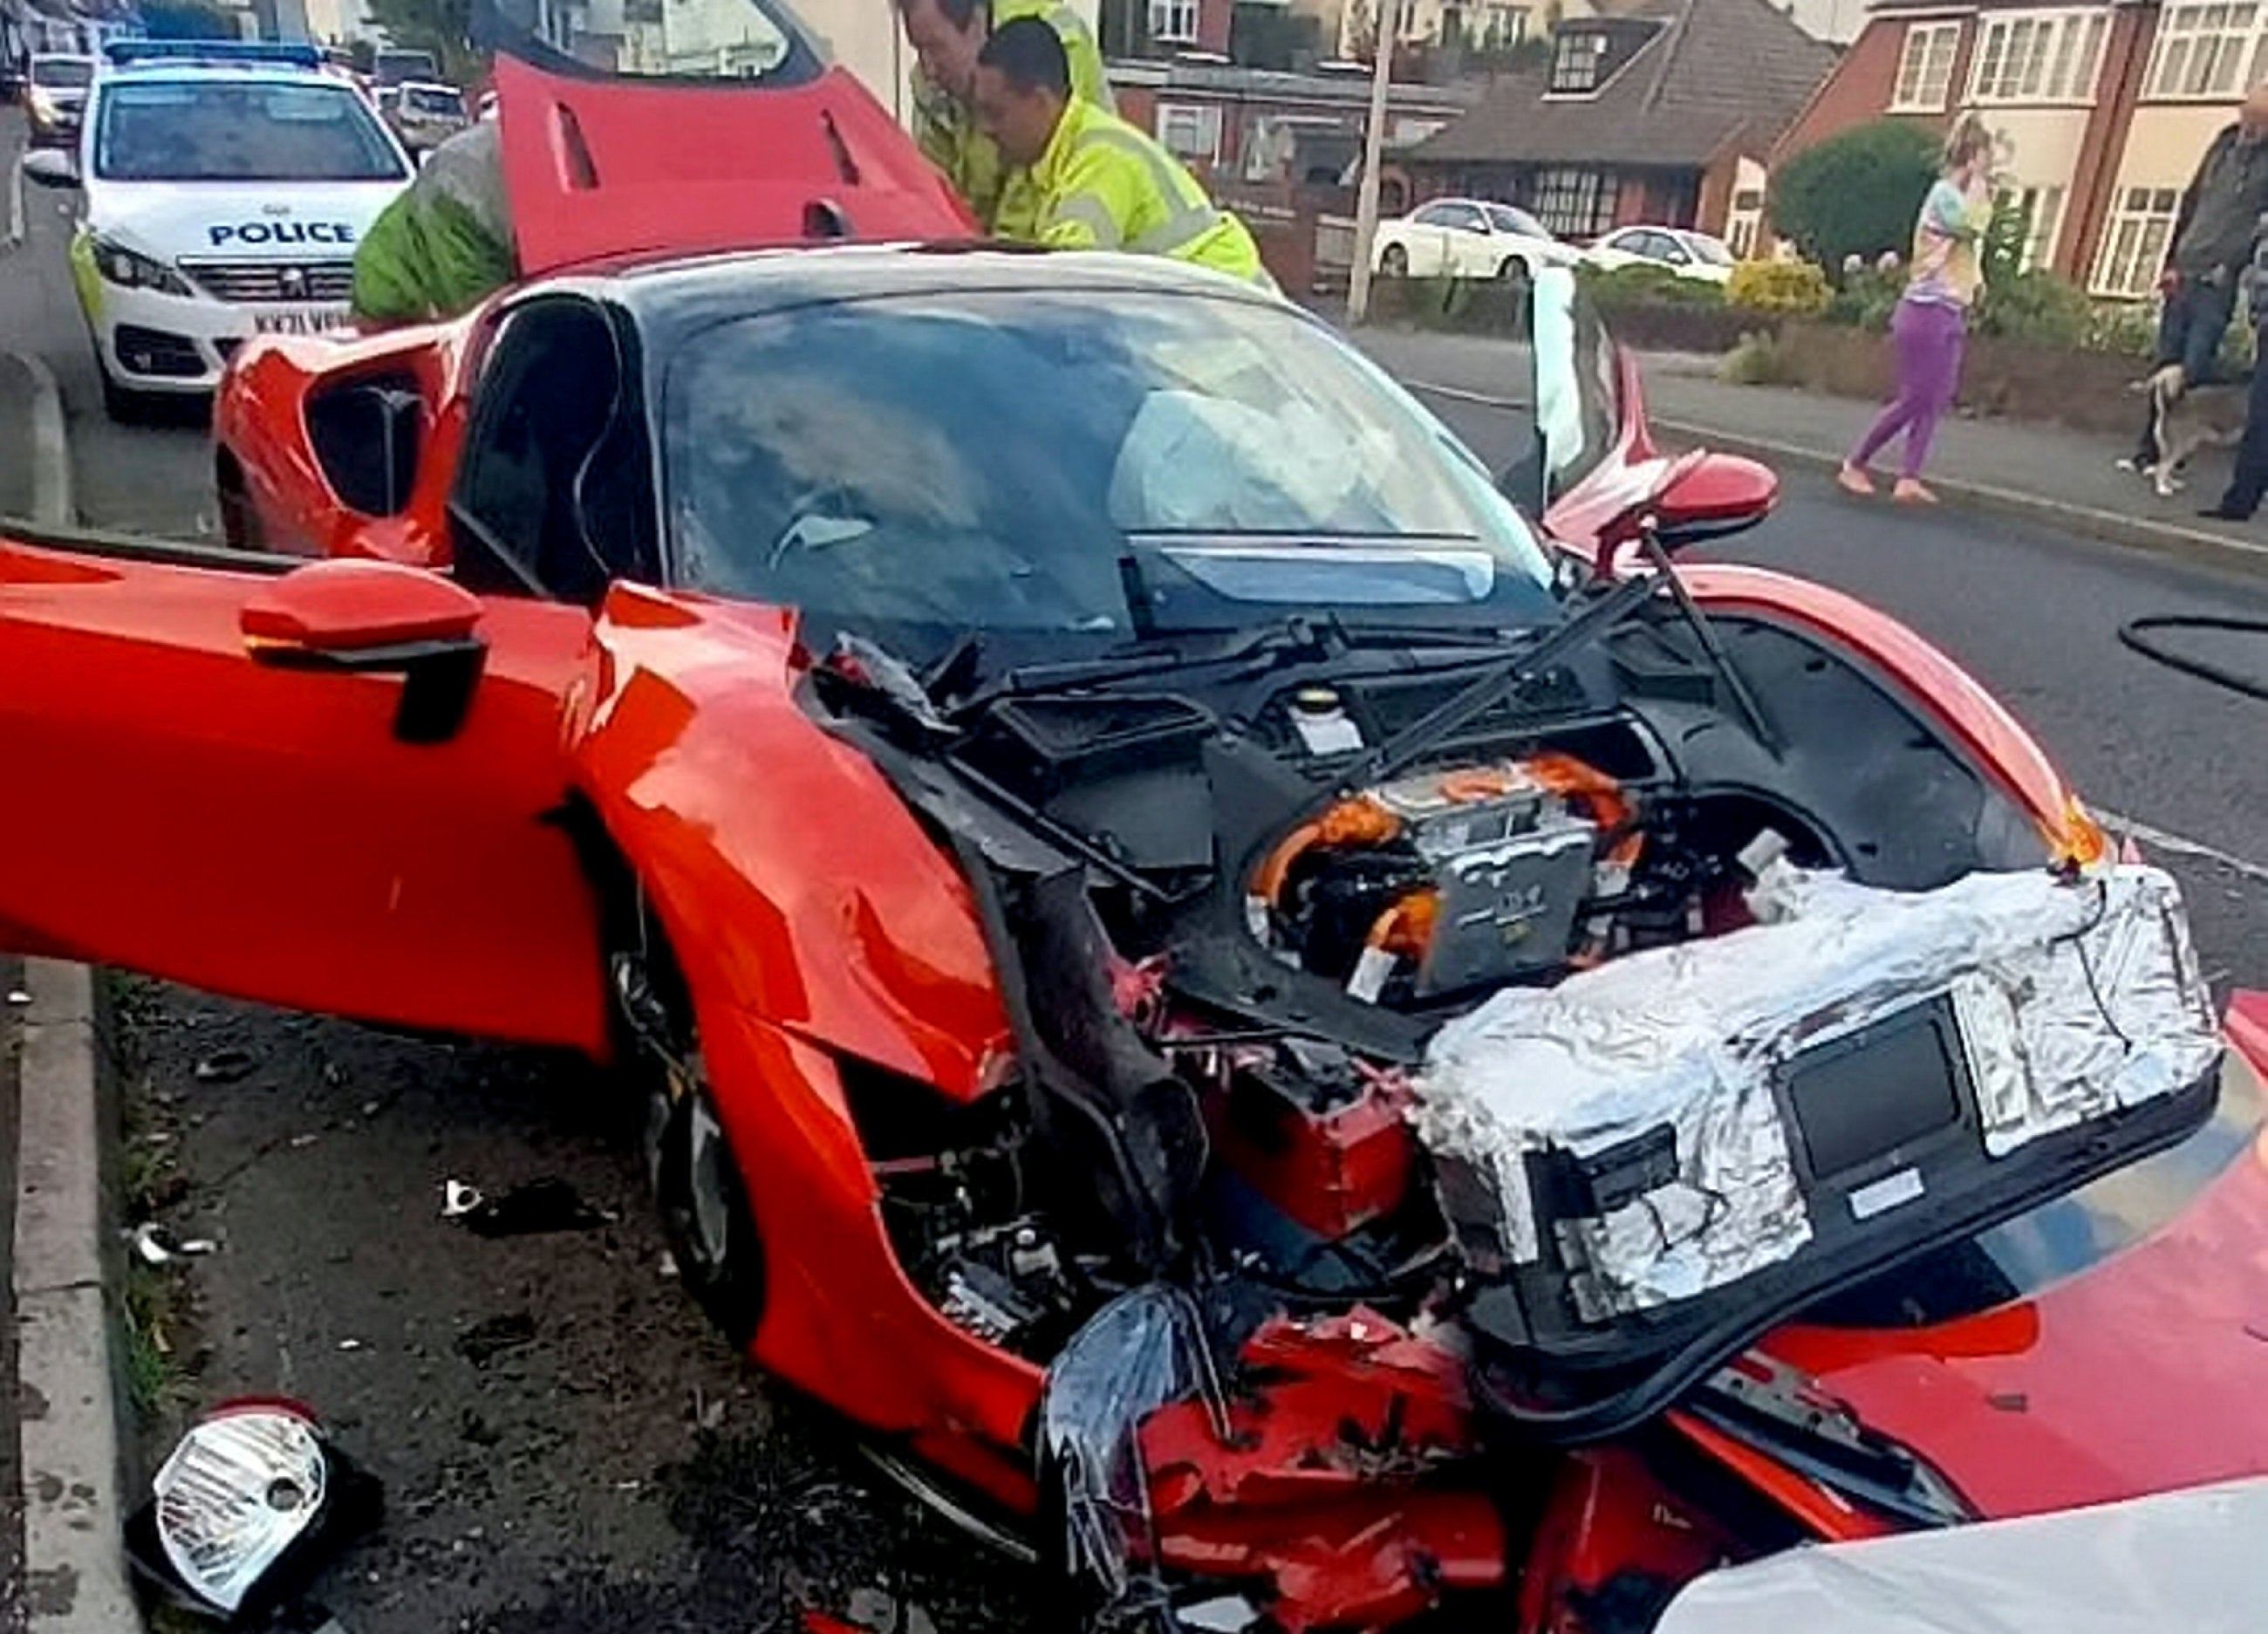 The Ferrari collided with five parked cars